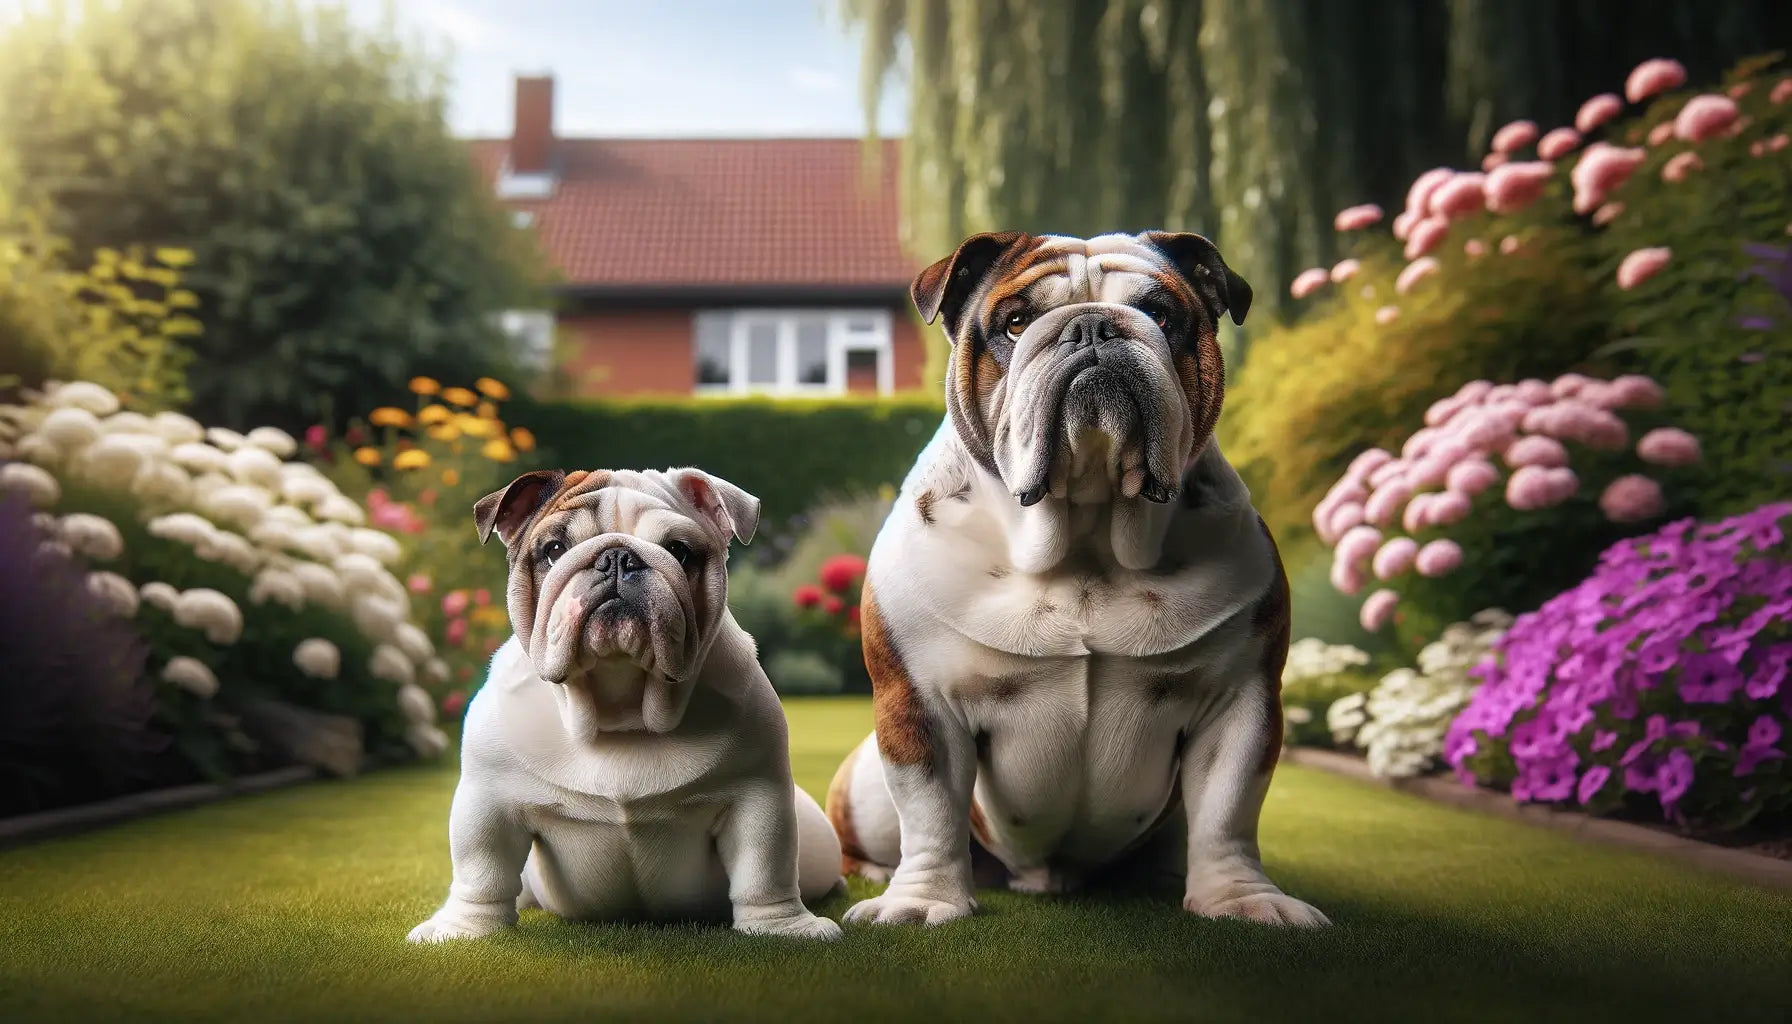 Image contrasting an English Bulldog with a traditional white and brindle coat against a leaner white-coated Olde English Bulldogge outdoors.